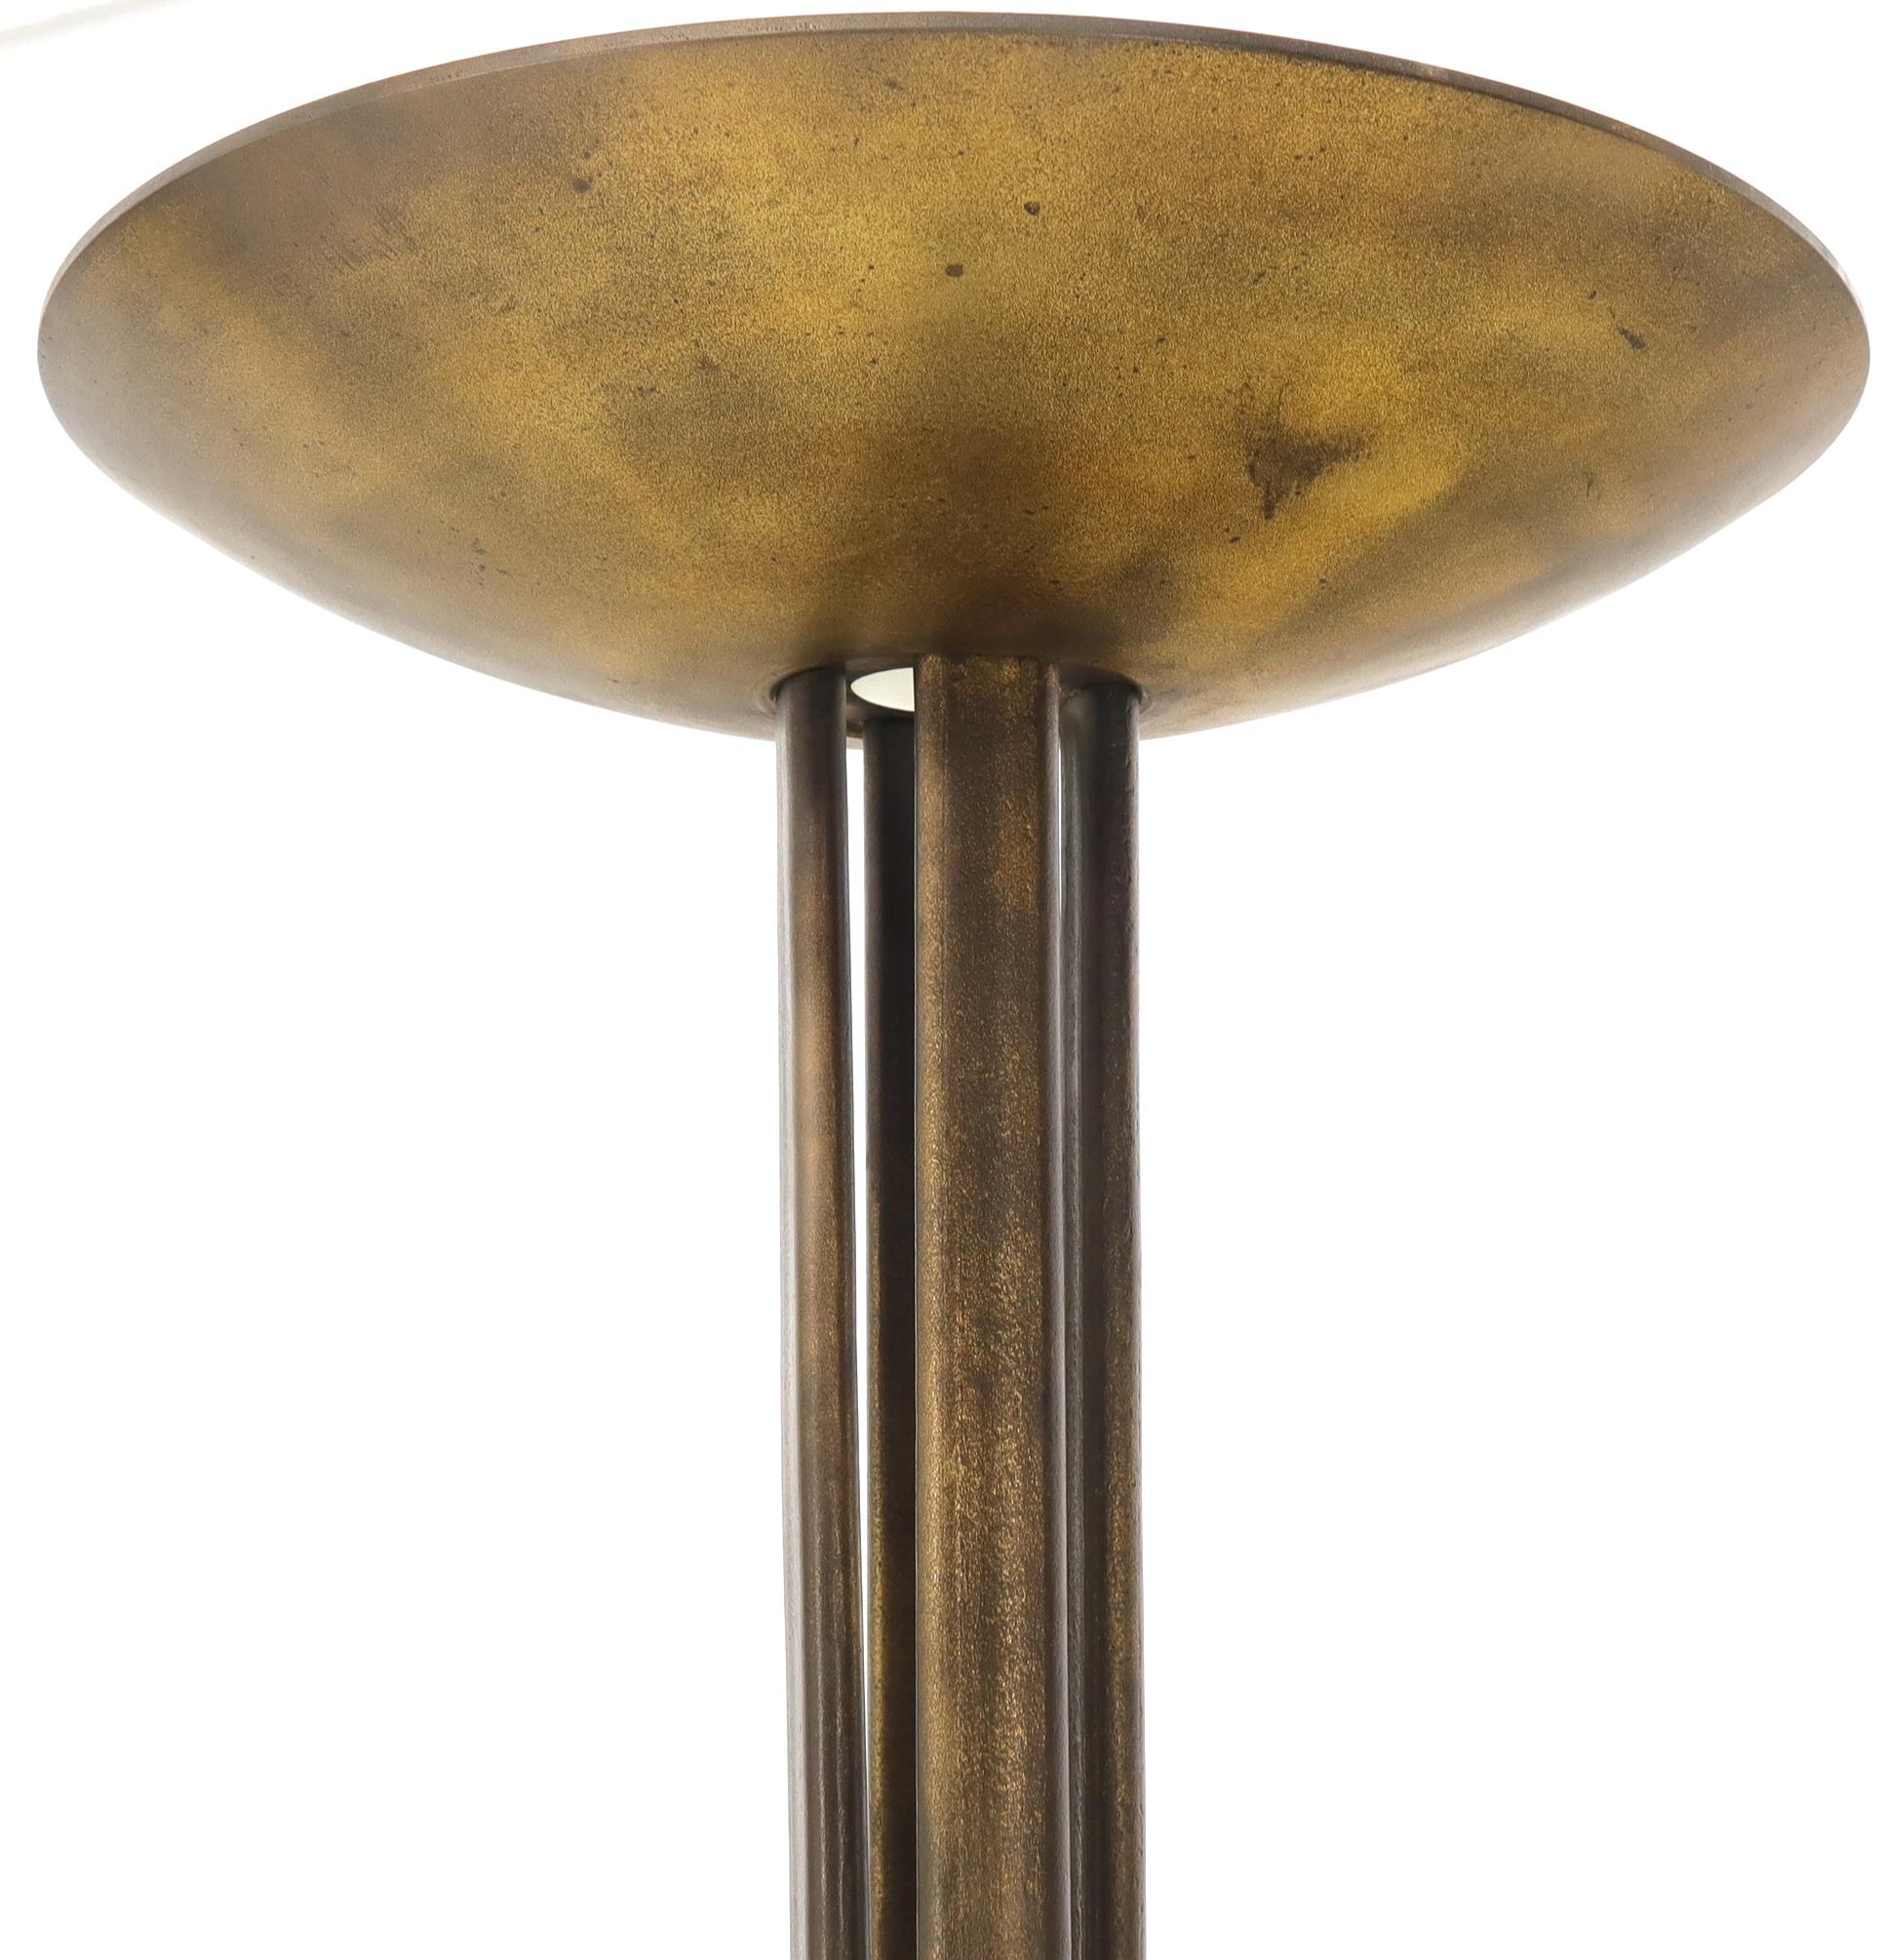 Unknown Cross Base 68 Tall Metal Dish Shade Floor Lamp For Sale